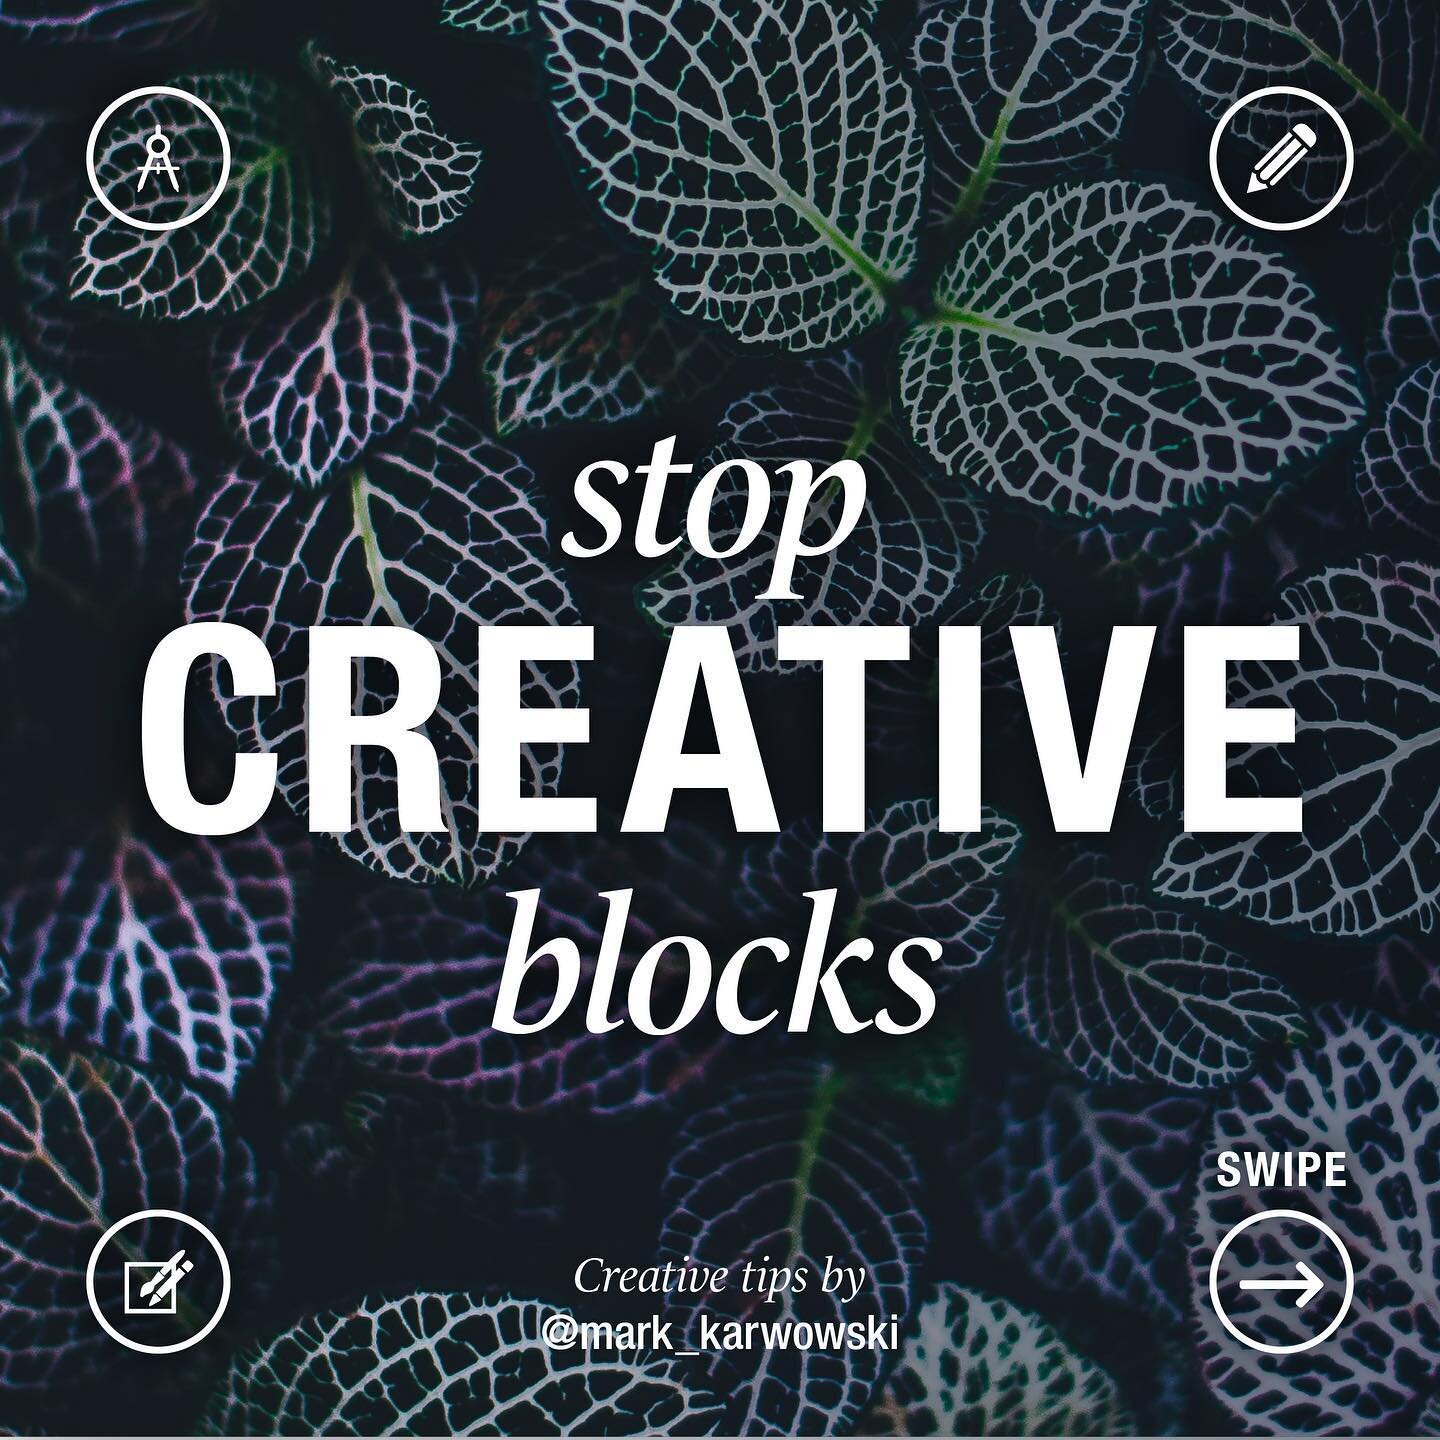 𝗙𝗼𝗹𝗹𝗼𝘄 @𝗺𝗮𝗿𝗸_𝗸𝗮𝗿𝘄𝗼𝘄𝘀𝗸𝗶 for more designs, tips, illustrations &amp; photography. Here are my tips on how I get over creative blocks as a designer, save this post in your bookmarks.

𝗣𝗼𝗱𝗰𝗮𝘀𝘁 𝗿𝗲𝗳𝗲𝗿𝗲𝗻𝗰𝗲: @99percentinvis